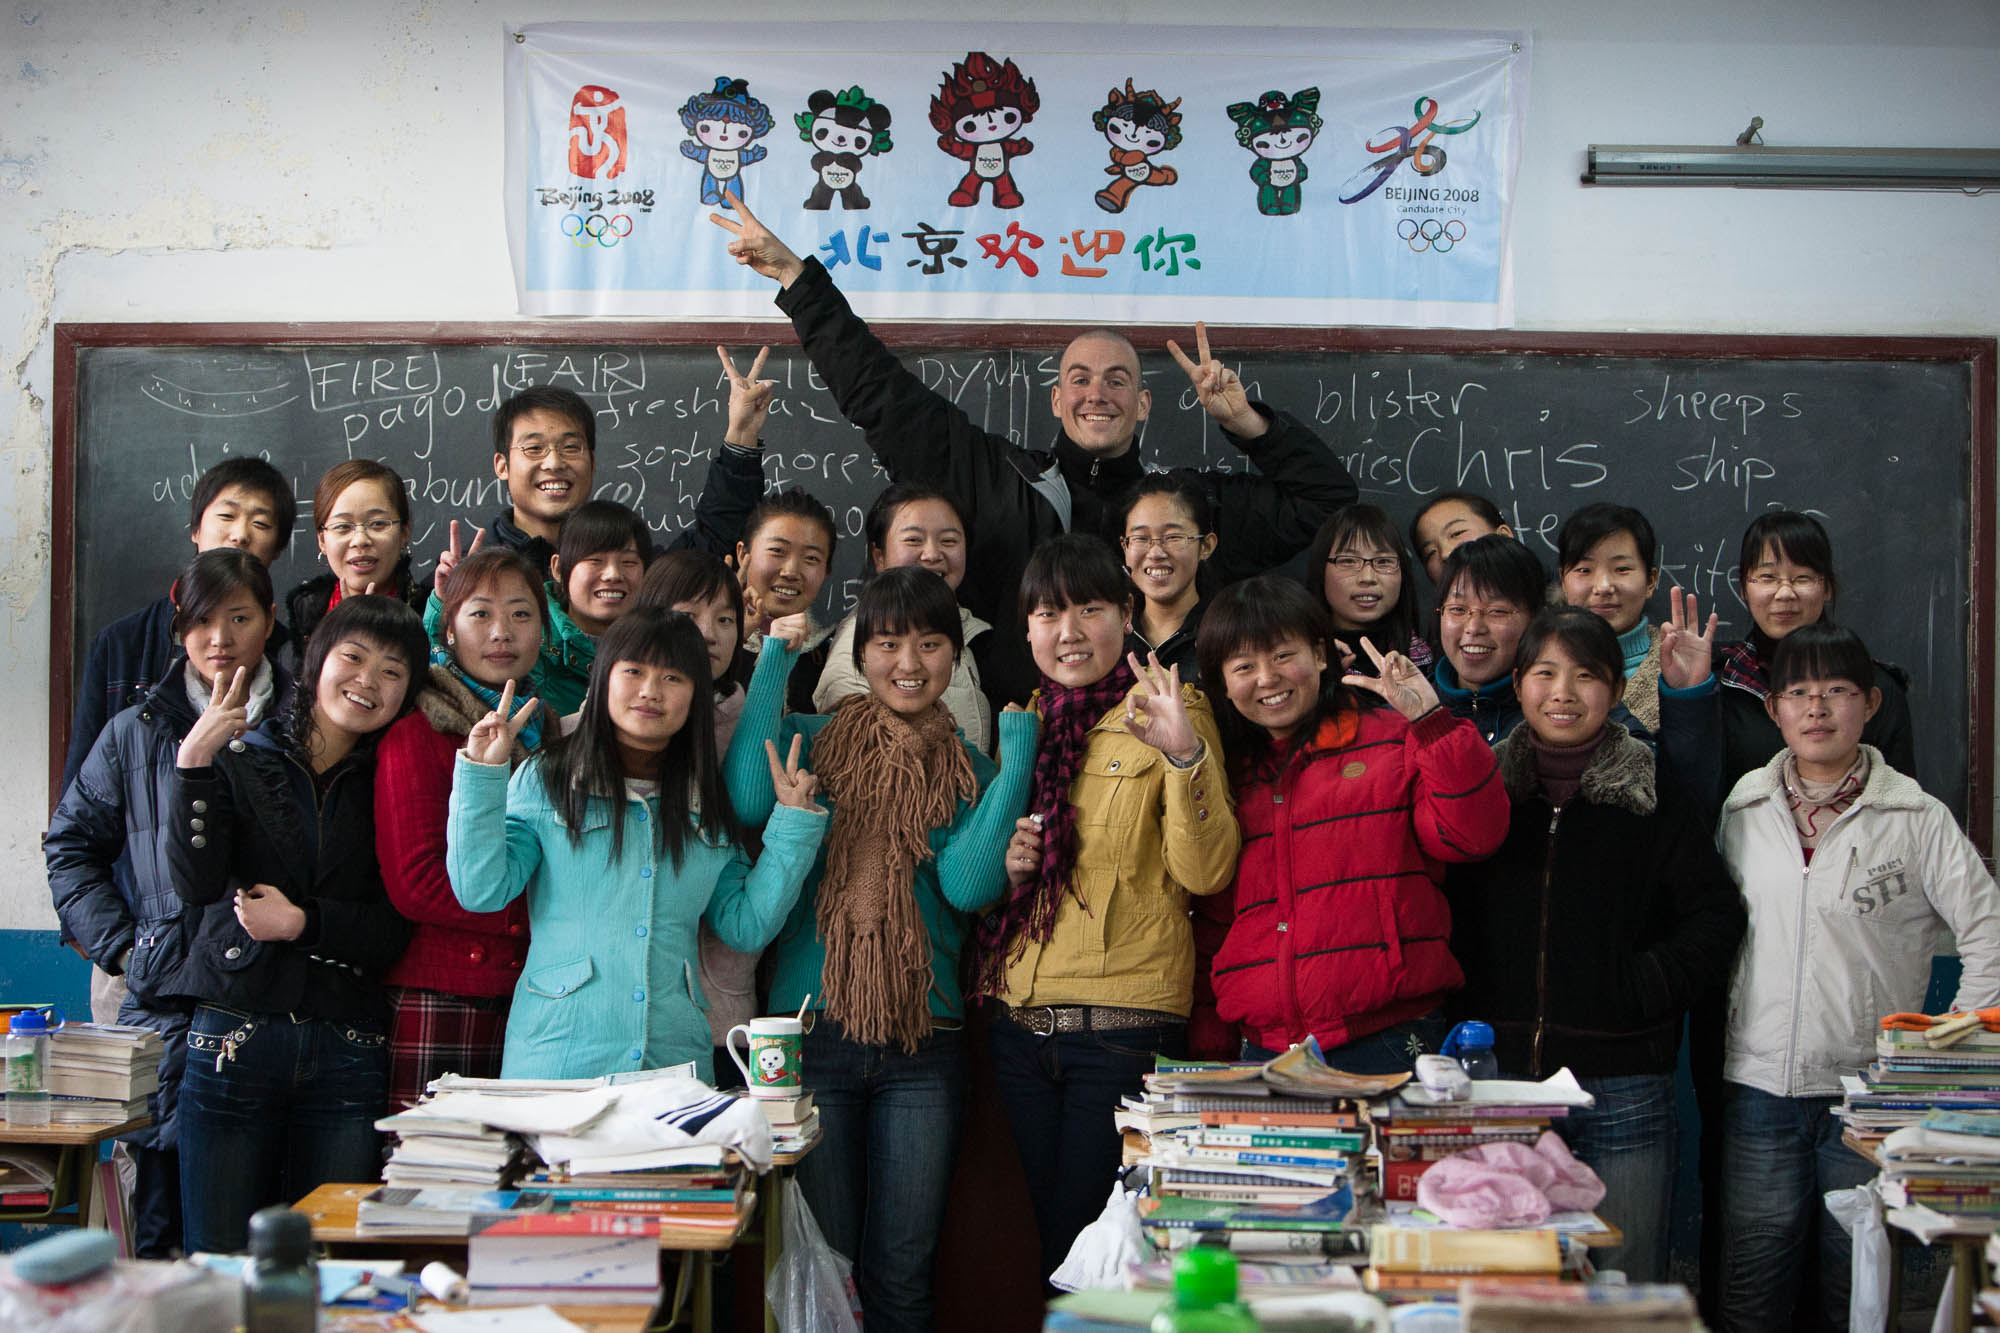 This English class in Dingzhou took me in